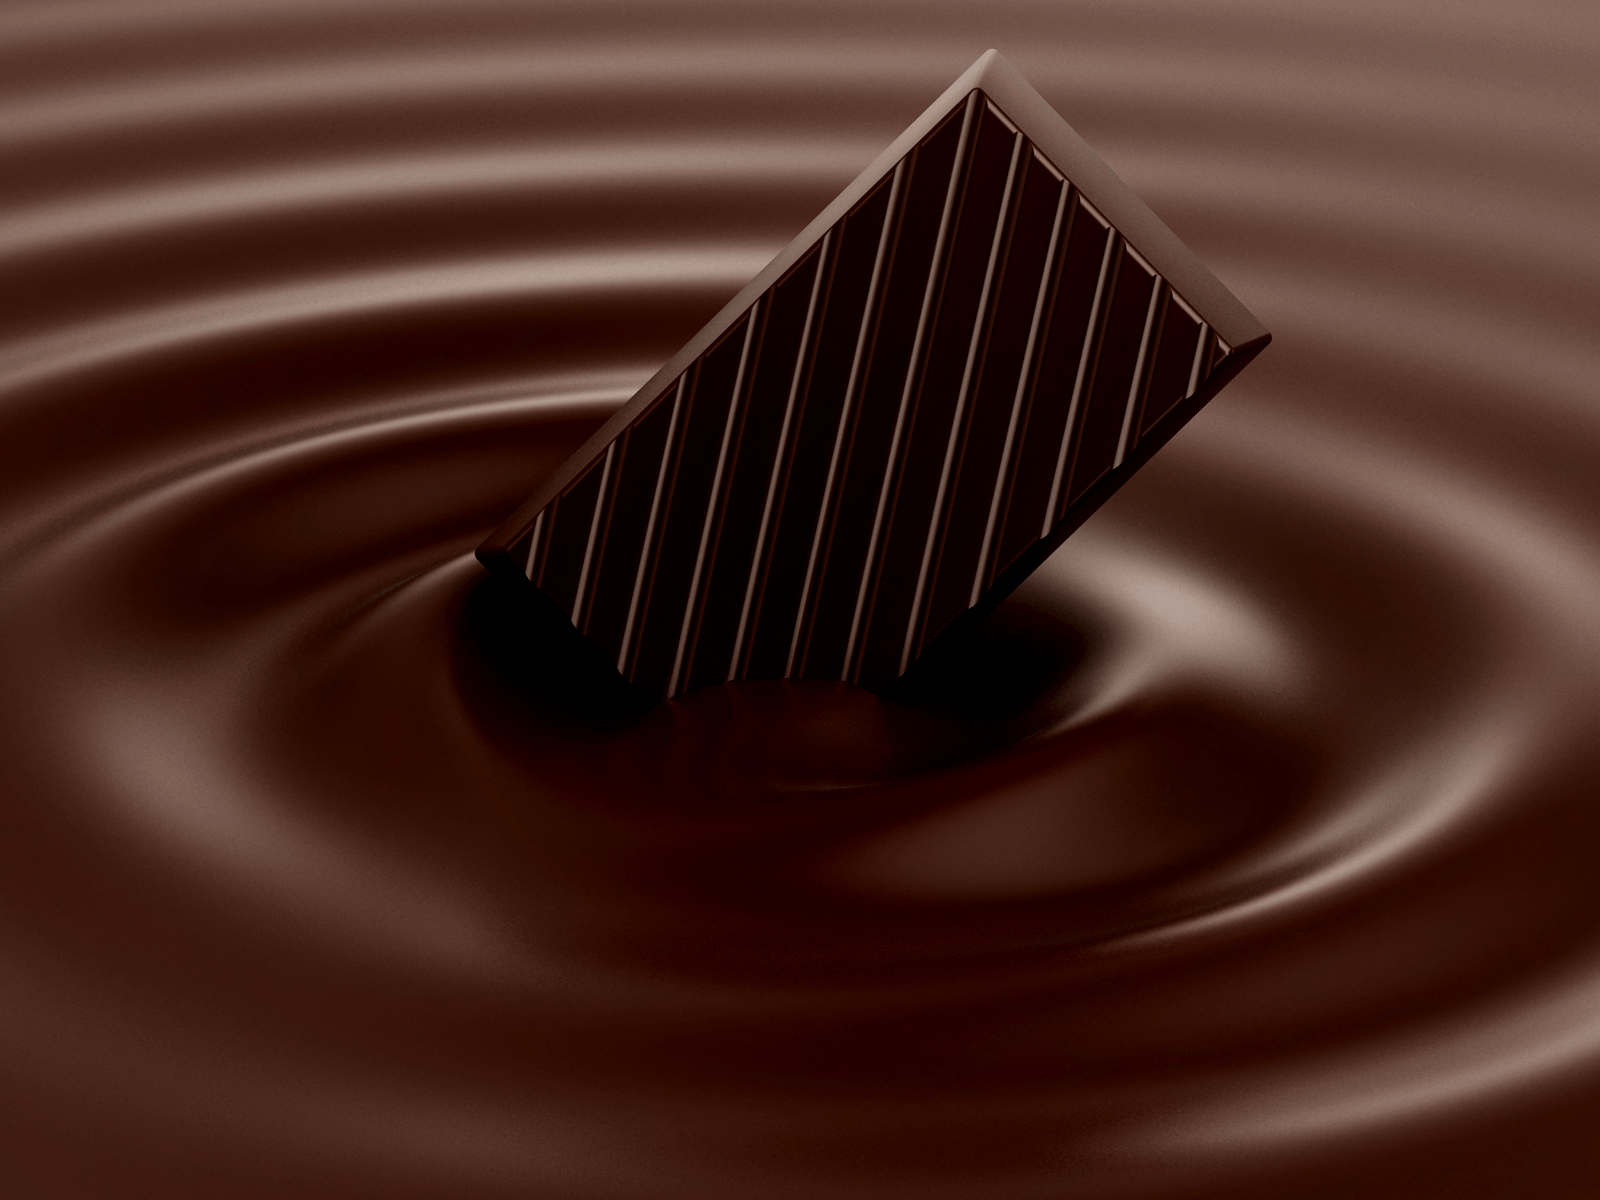 Chocolate Wallpaper, HD Quality Chocolate Wallpaper for Free, Image